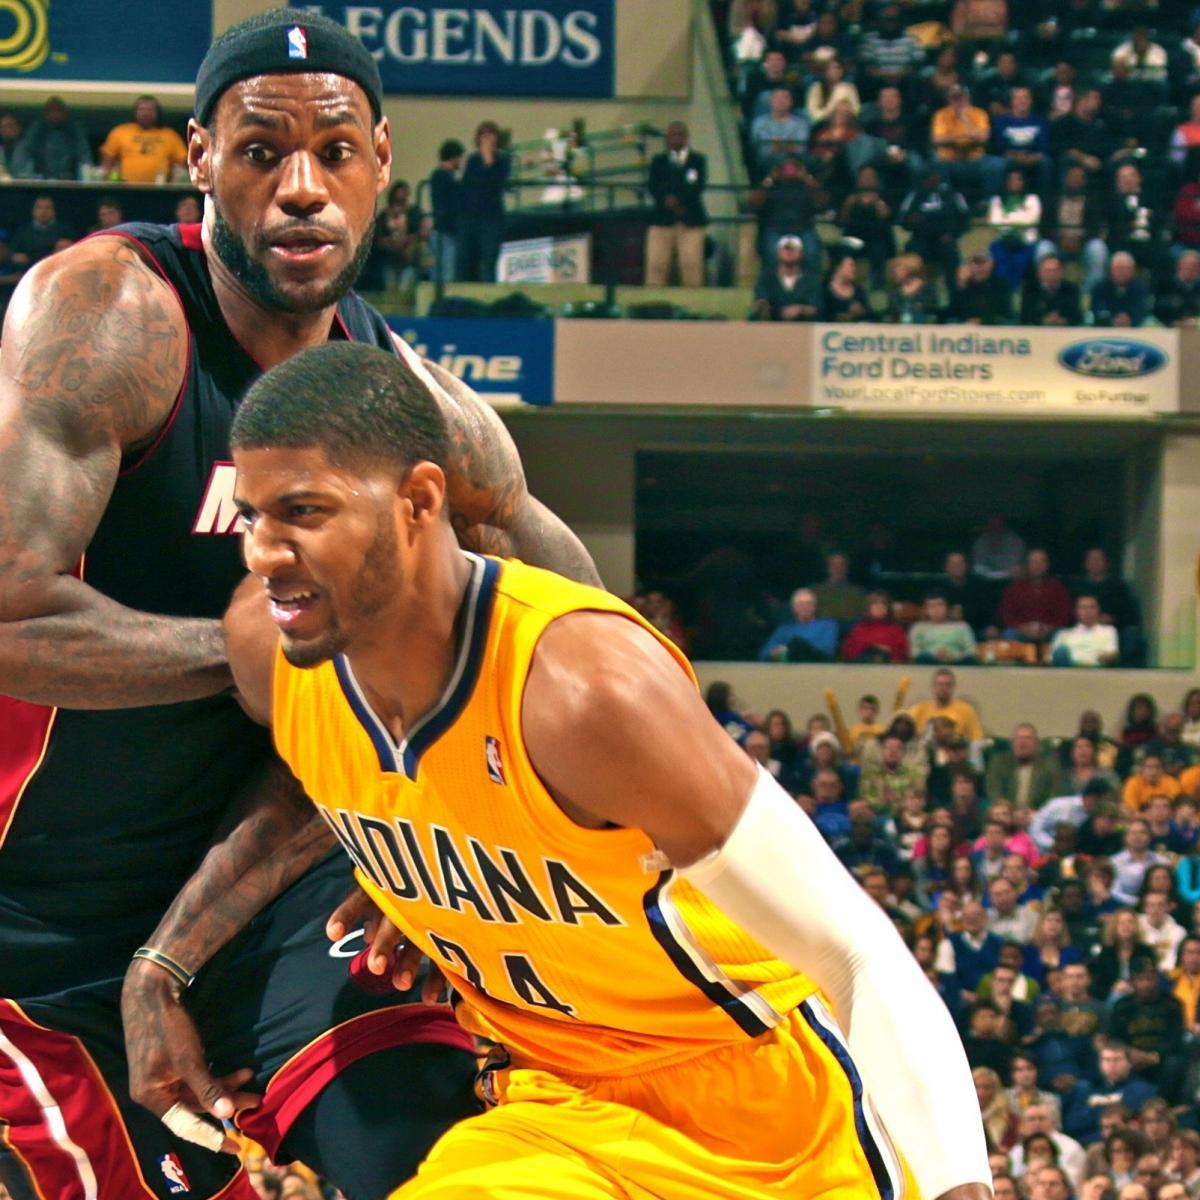 Where Does Paul George Rank Among the All-Time Greatest Pacers?